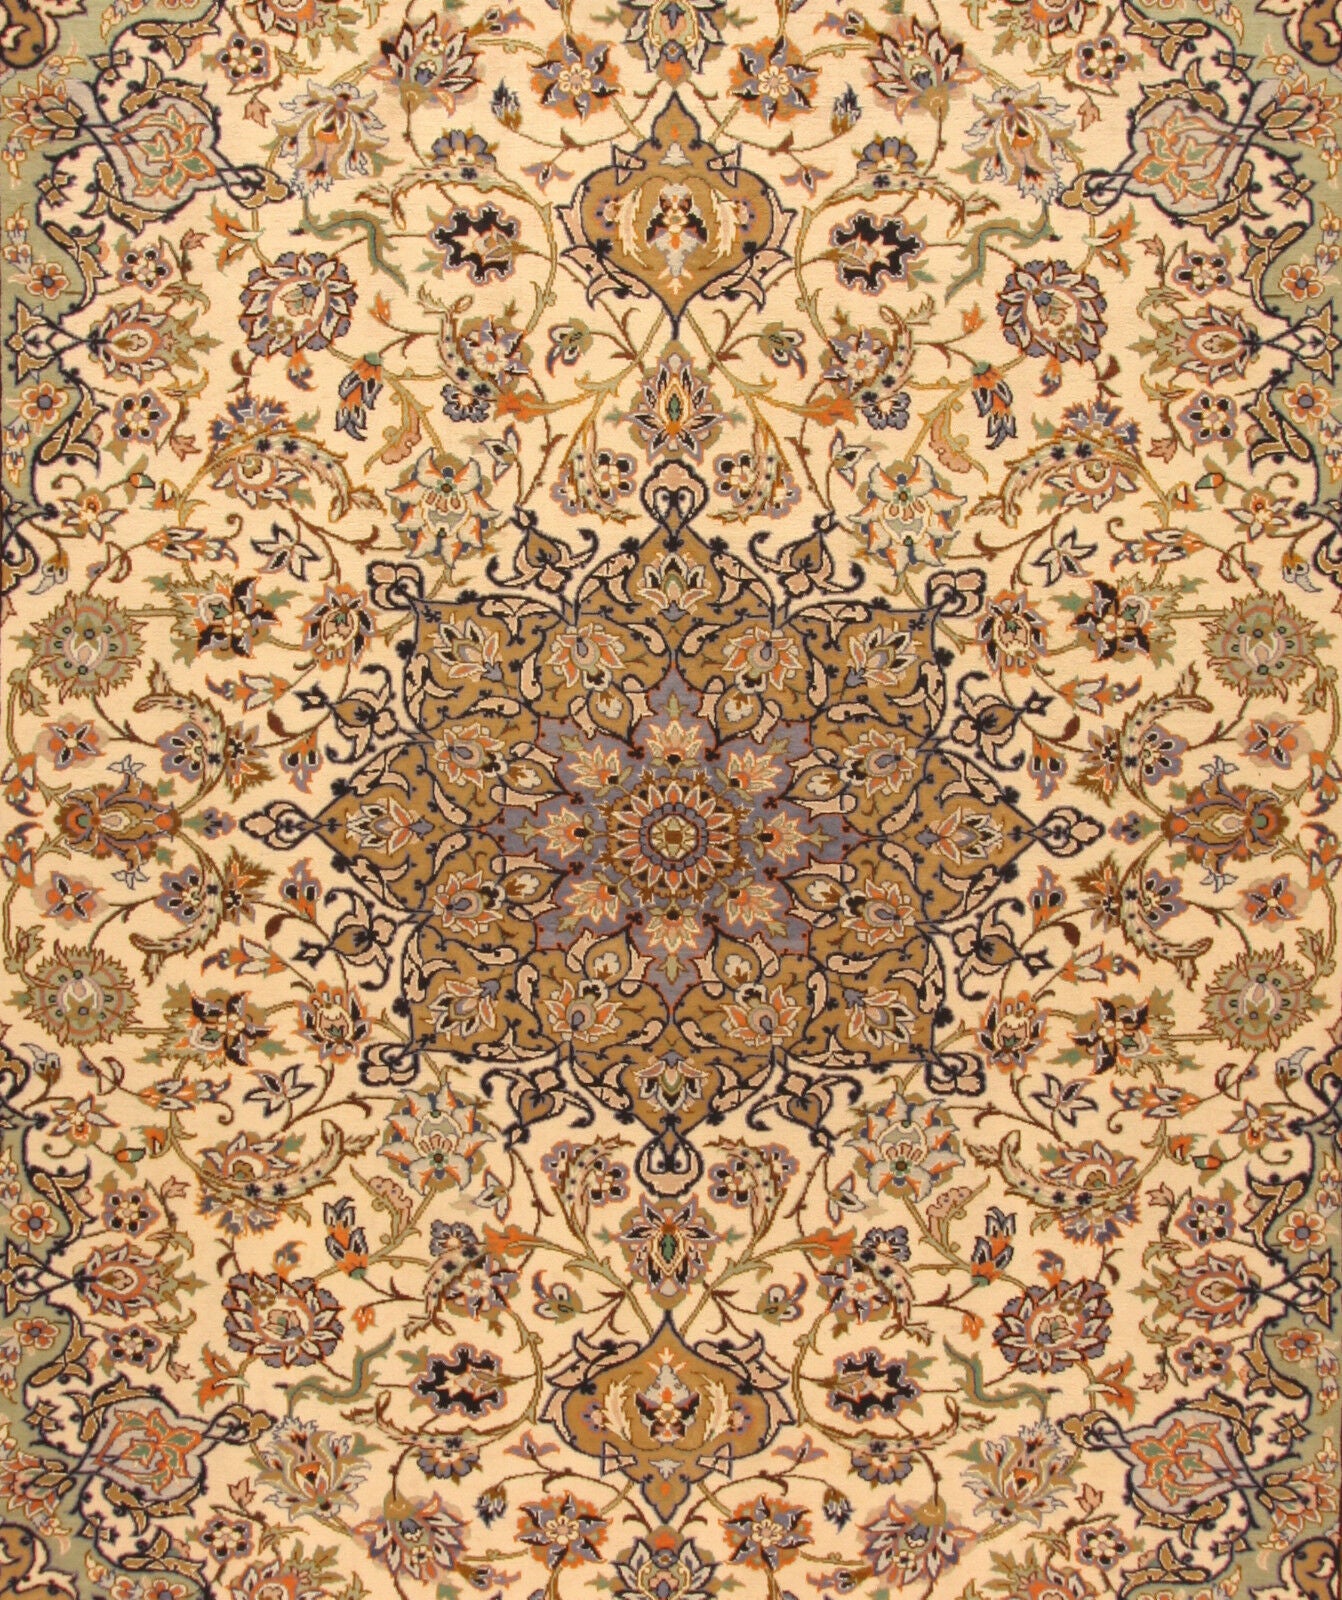 Close-up of intricate patterns on the Handmade Contemporary Persian Isfahan Rug